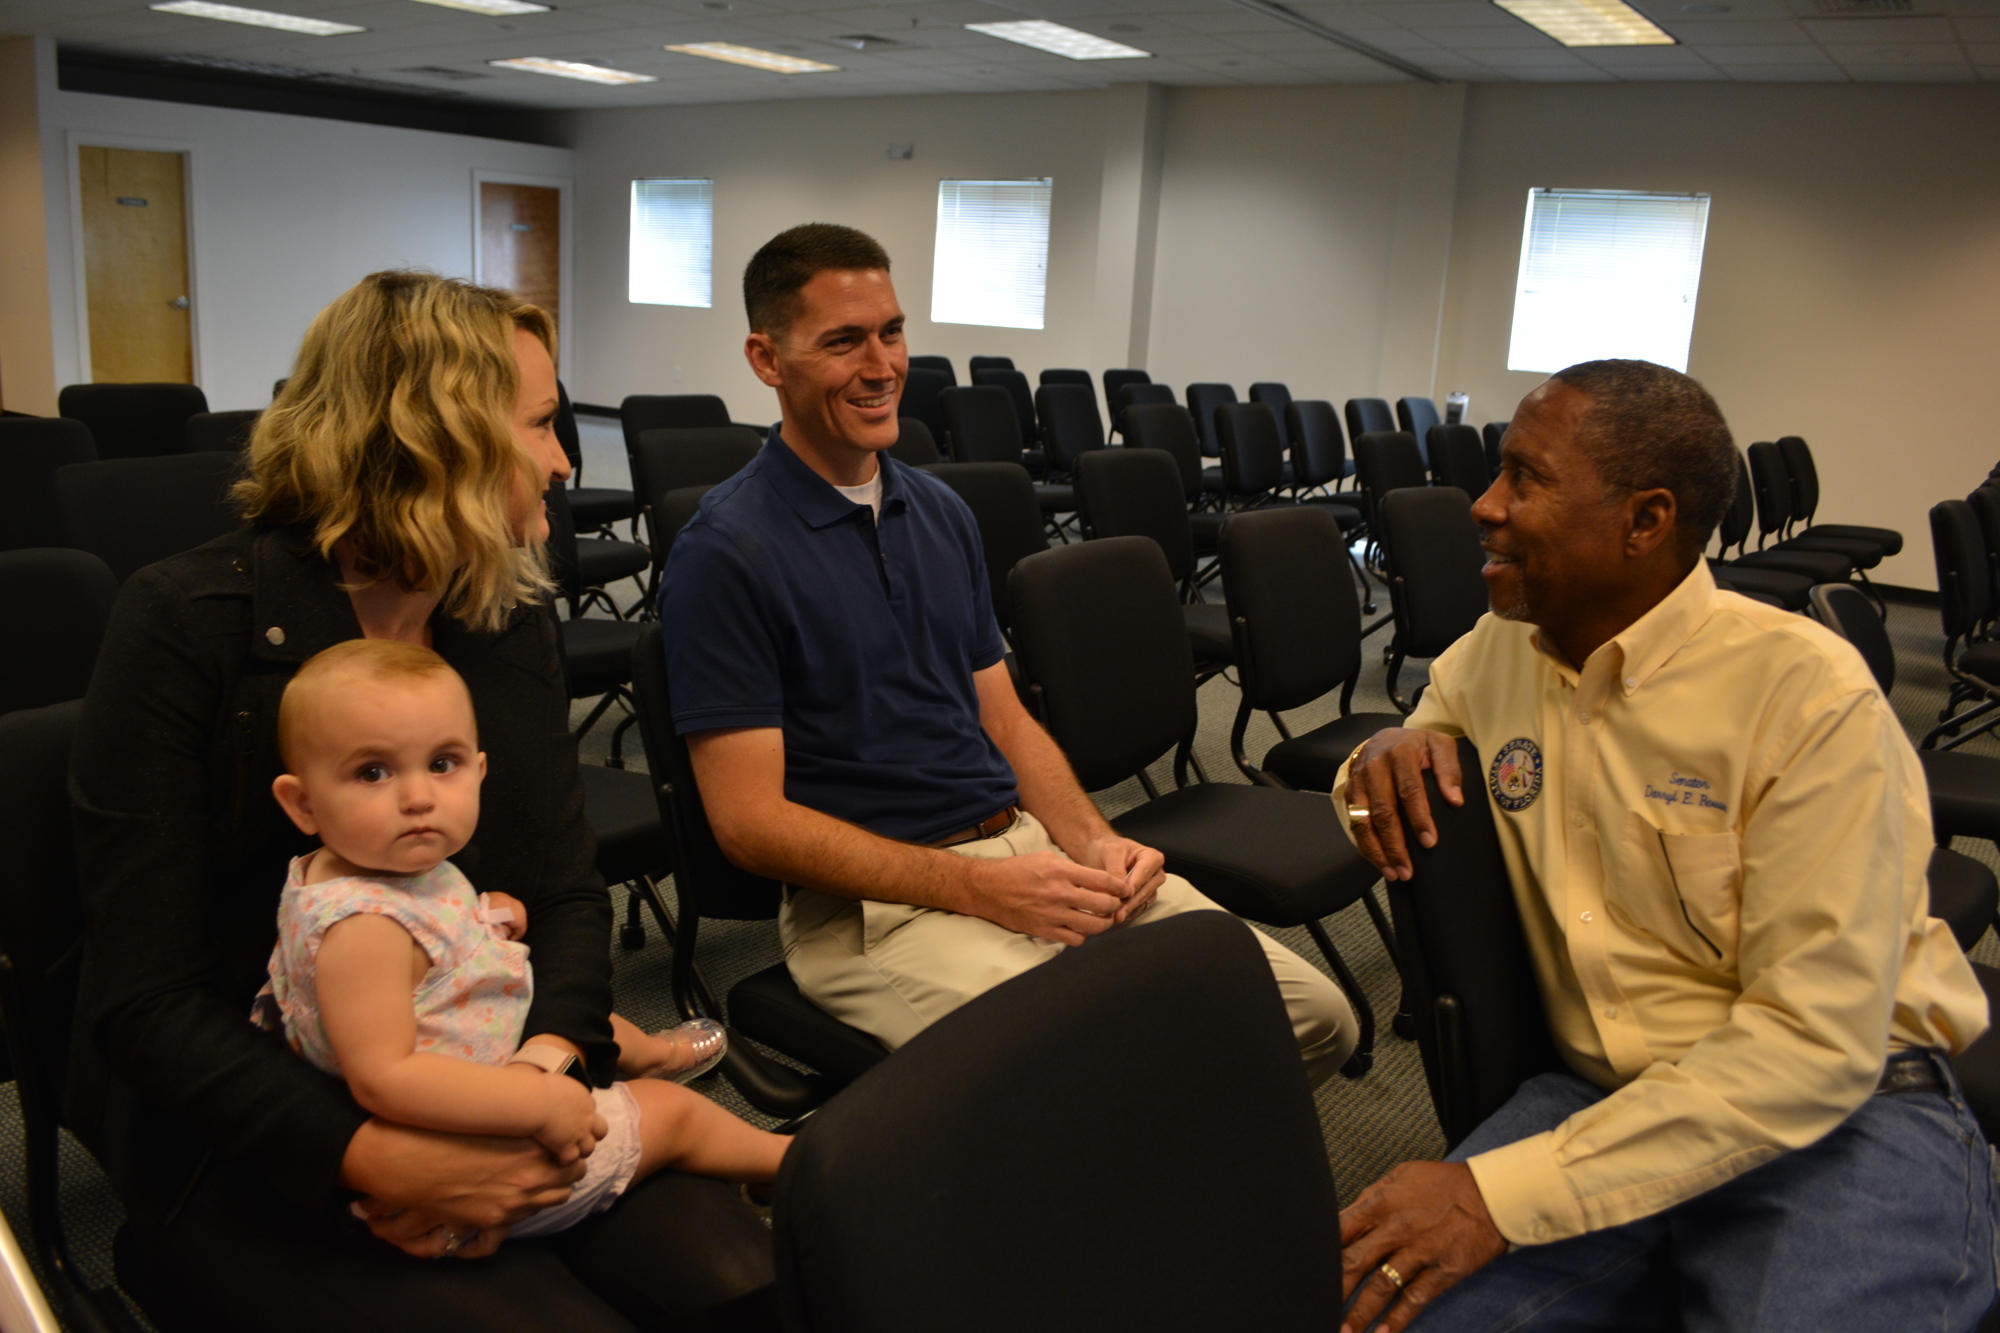 Recovered addict Brett Ramsden, pictured with his wife Mallery and daughter Teagan, talks with Florida Sen. Darryl Rouson, a retired addict, before a press conference Sept. 12 about the media campaign. Ramsden story is one of four